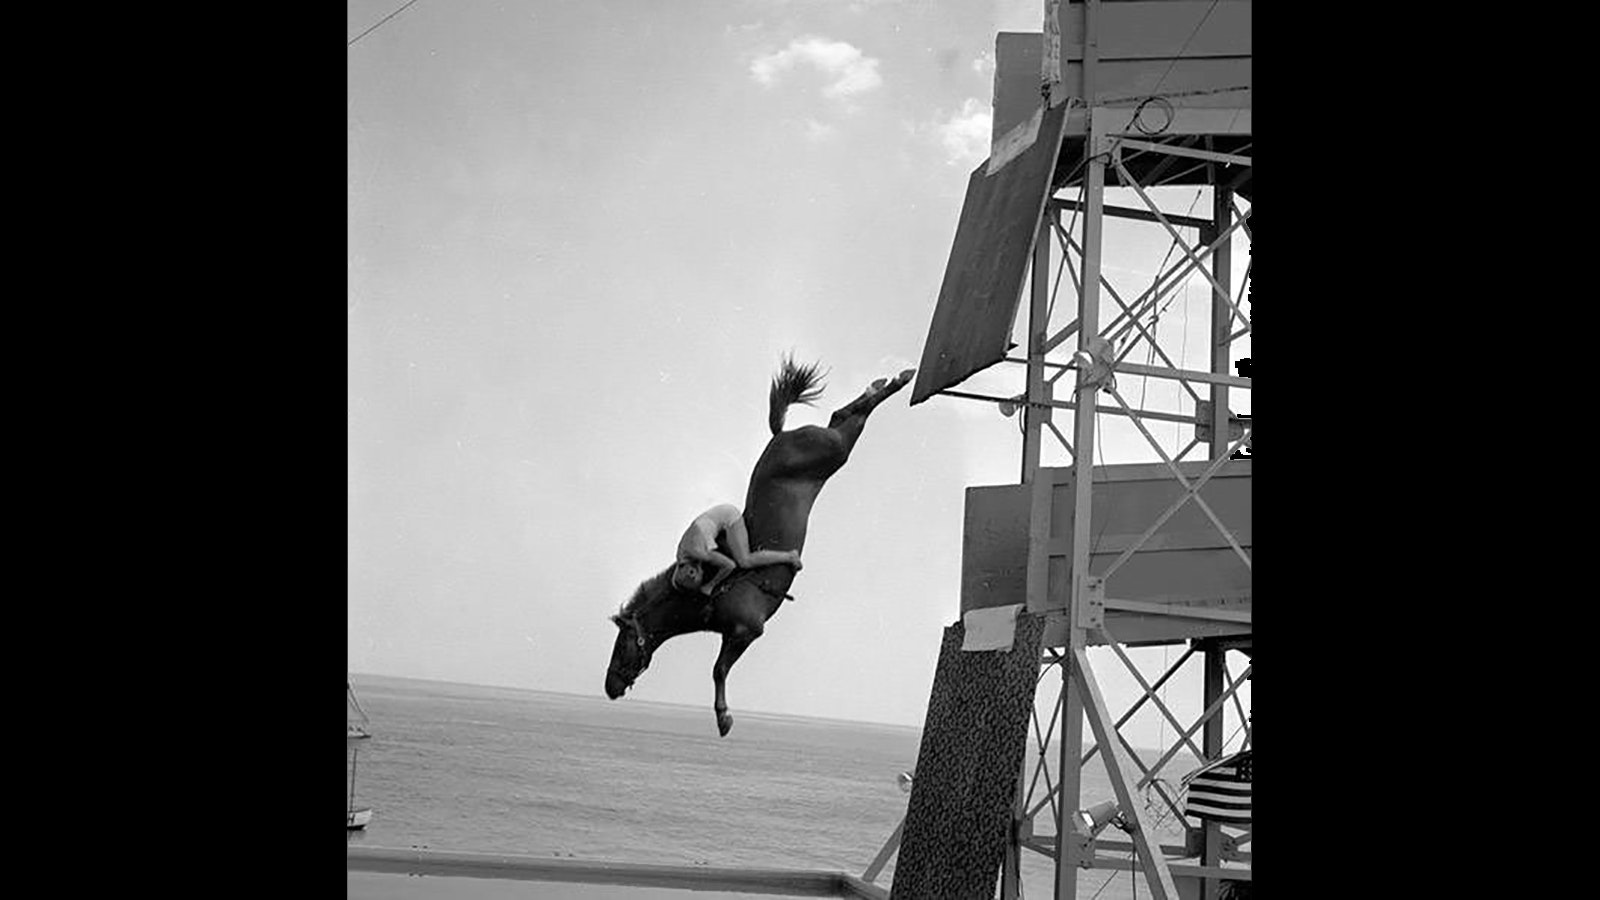 Notice the tuck as this unnamed rider plunges toward the pool below in 1955.